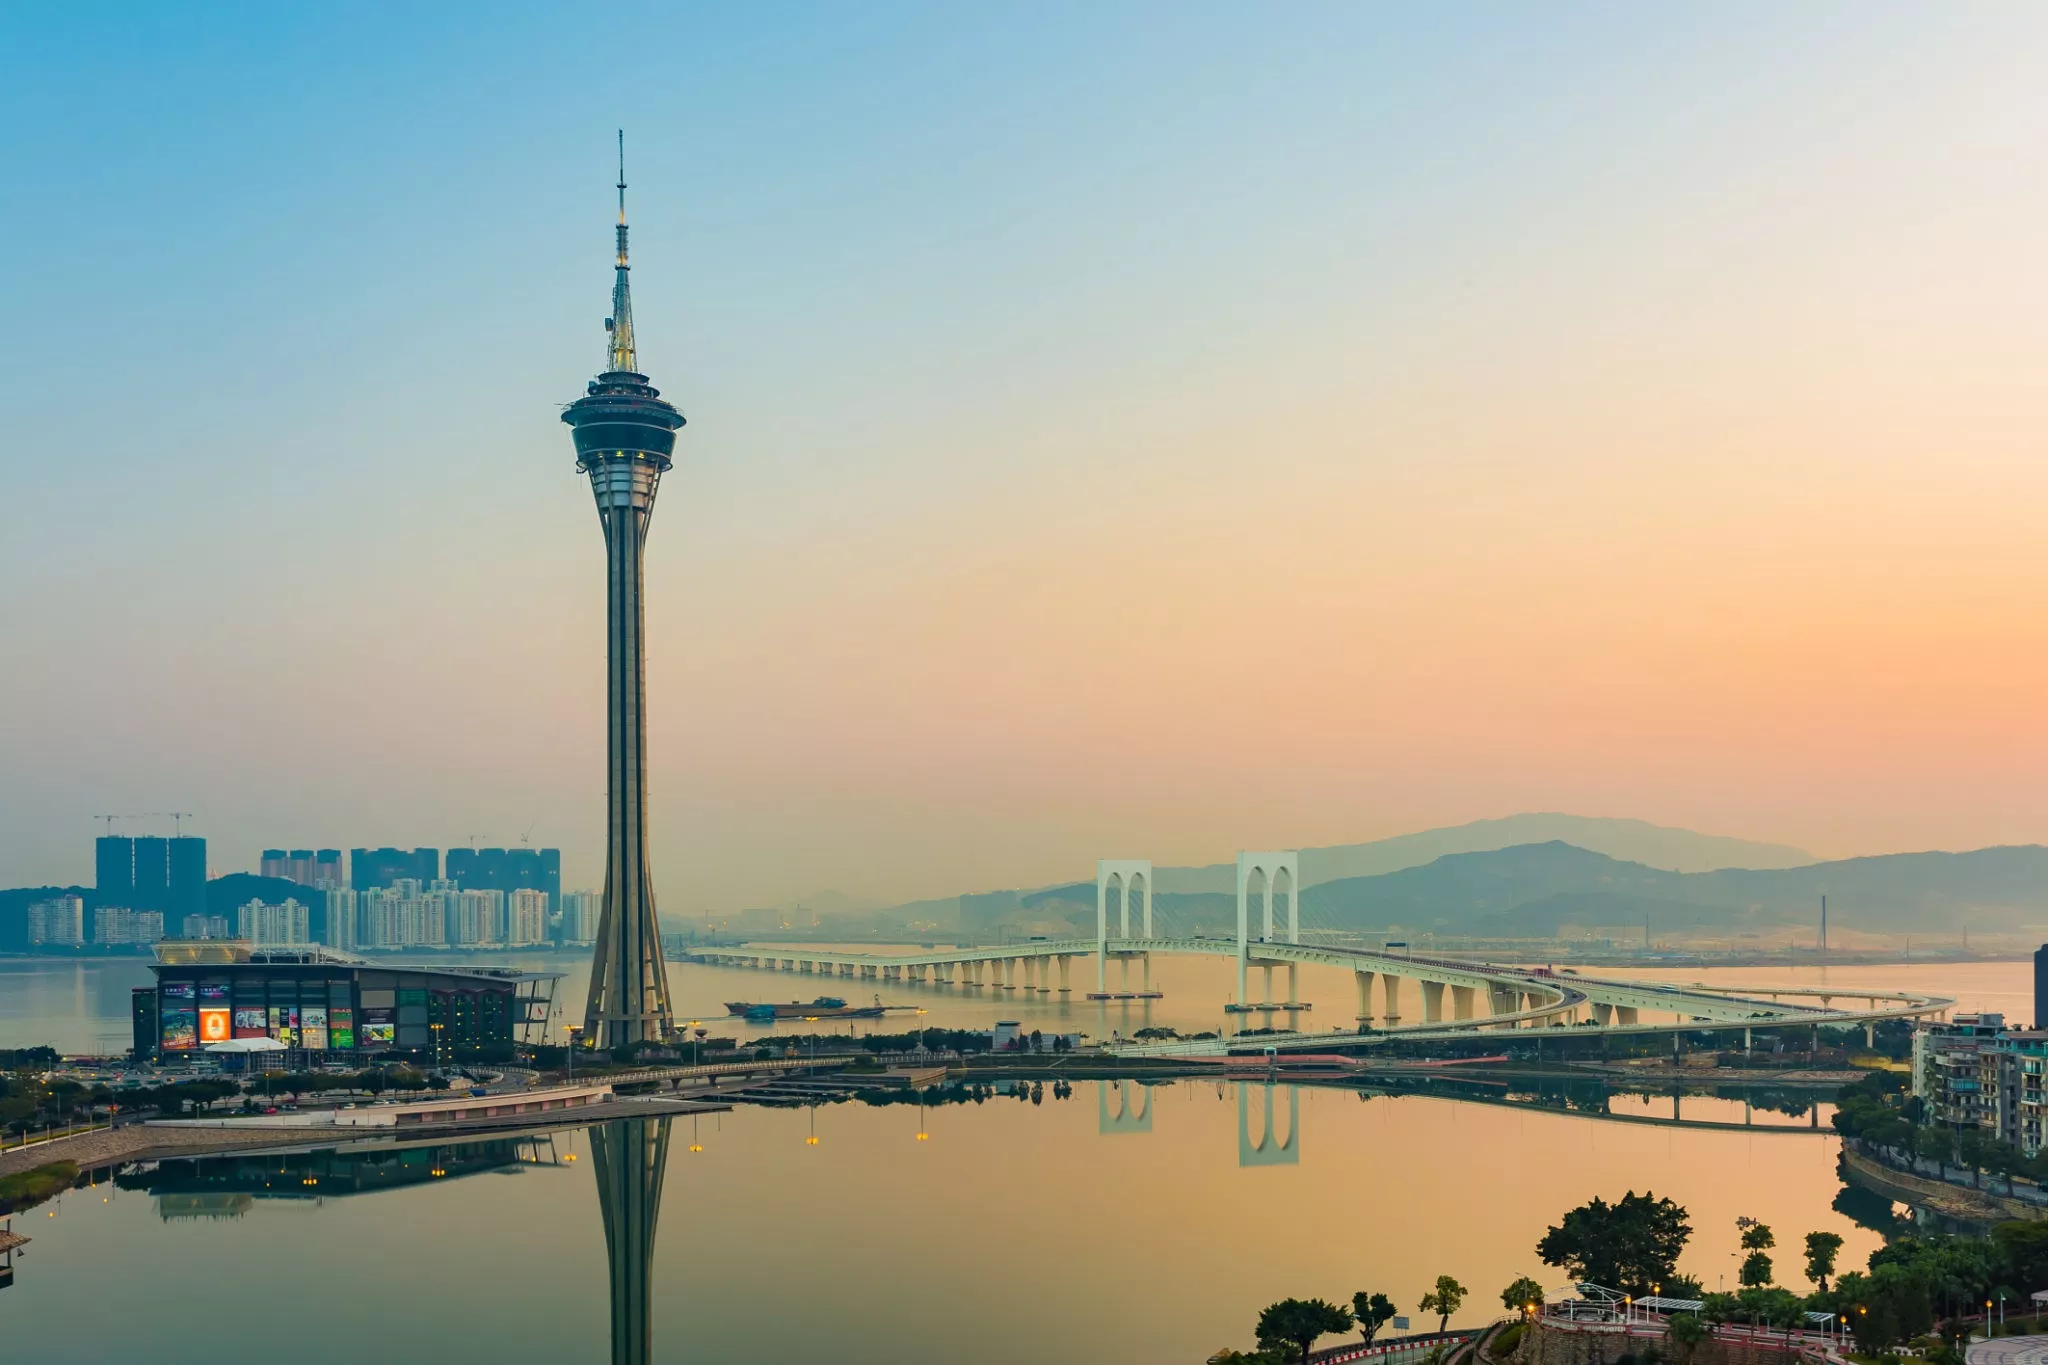 Macau Tower in China, East Asia | Observation Decks,Restaurants,Bungee Jumping - Rated 7.7